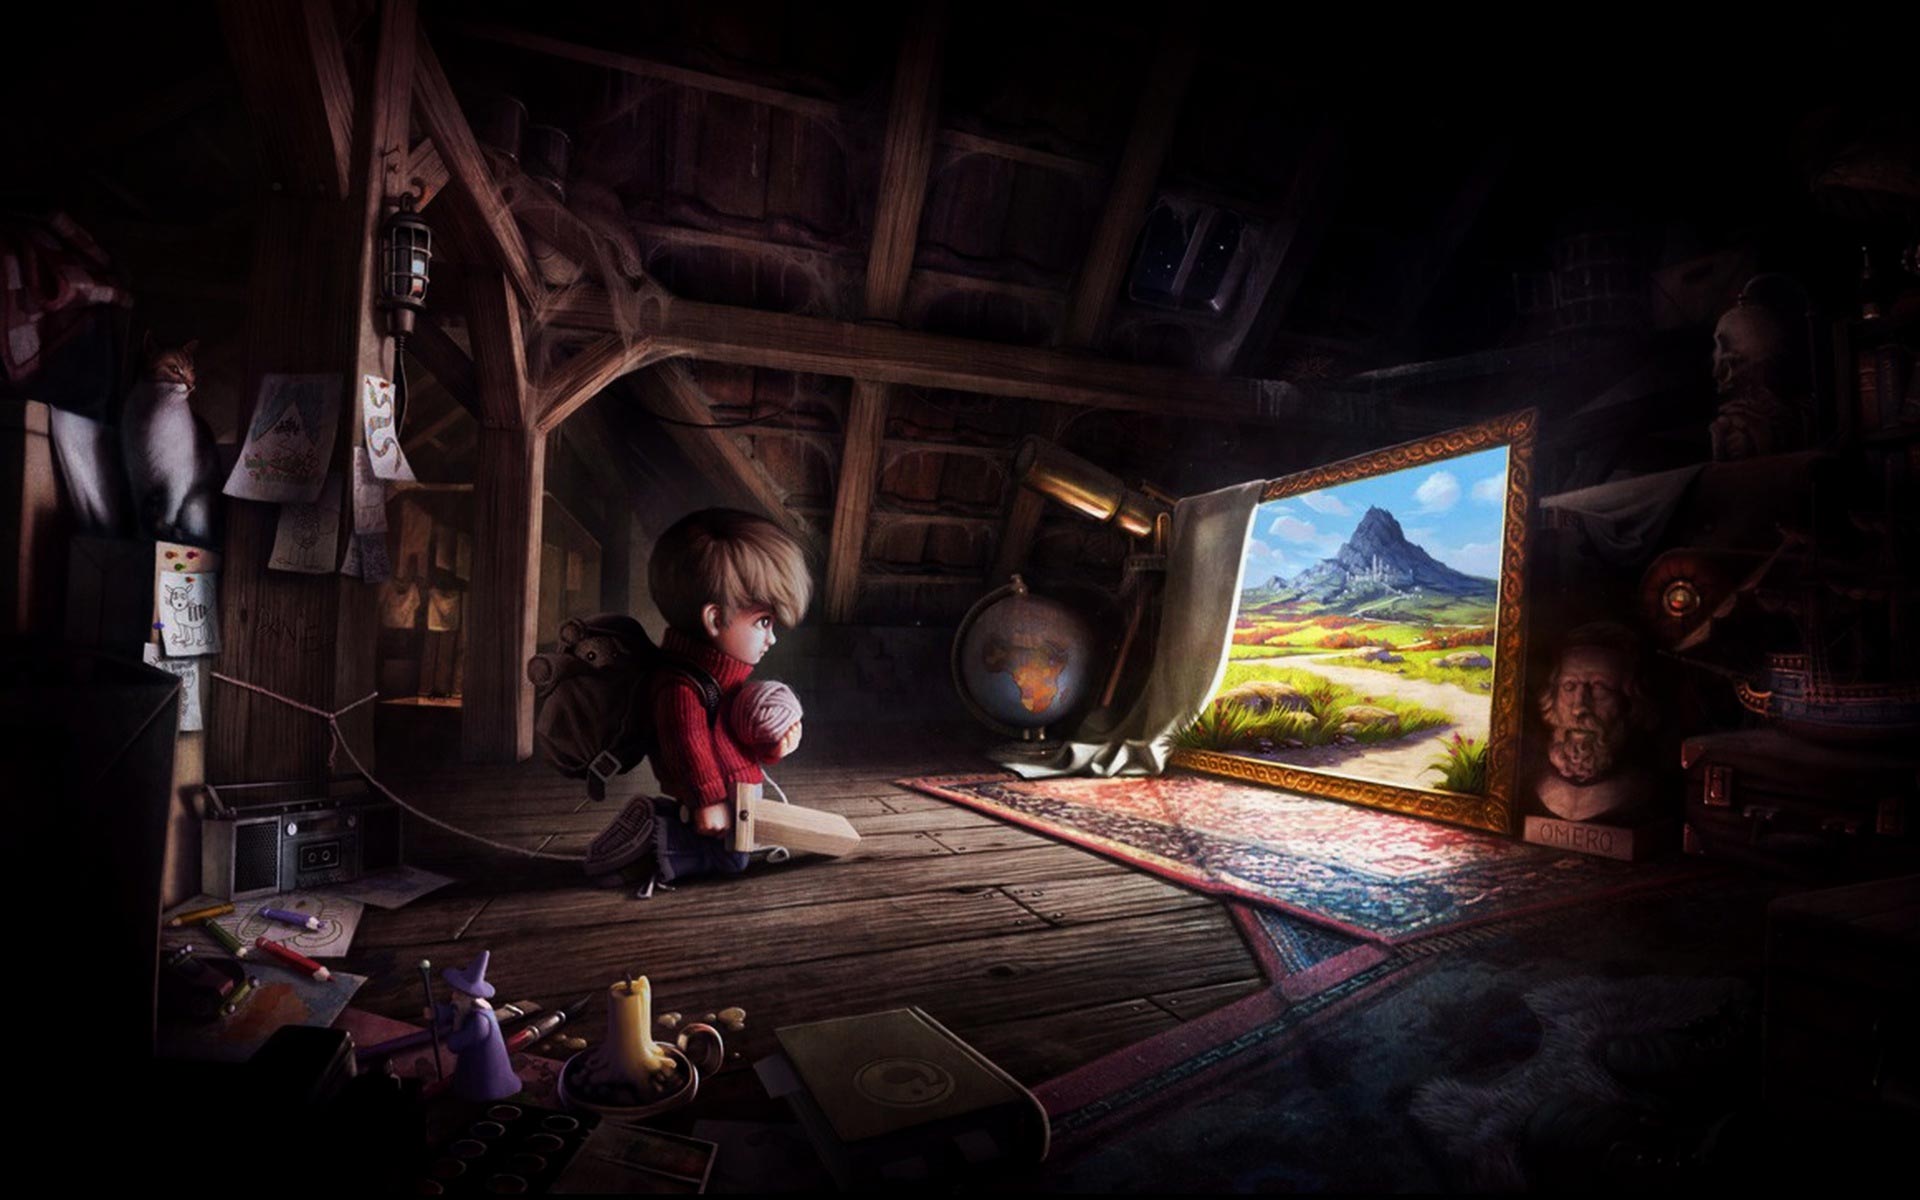 A whimsical child brings a touch of magic to a fantastical world.